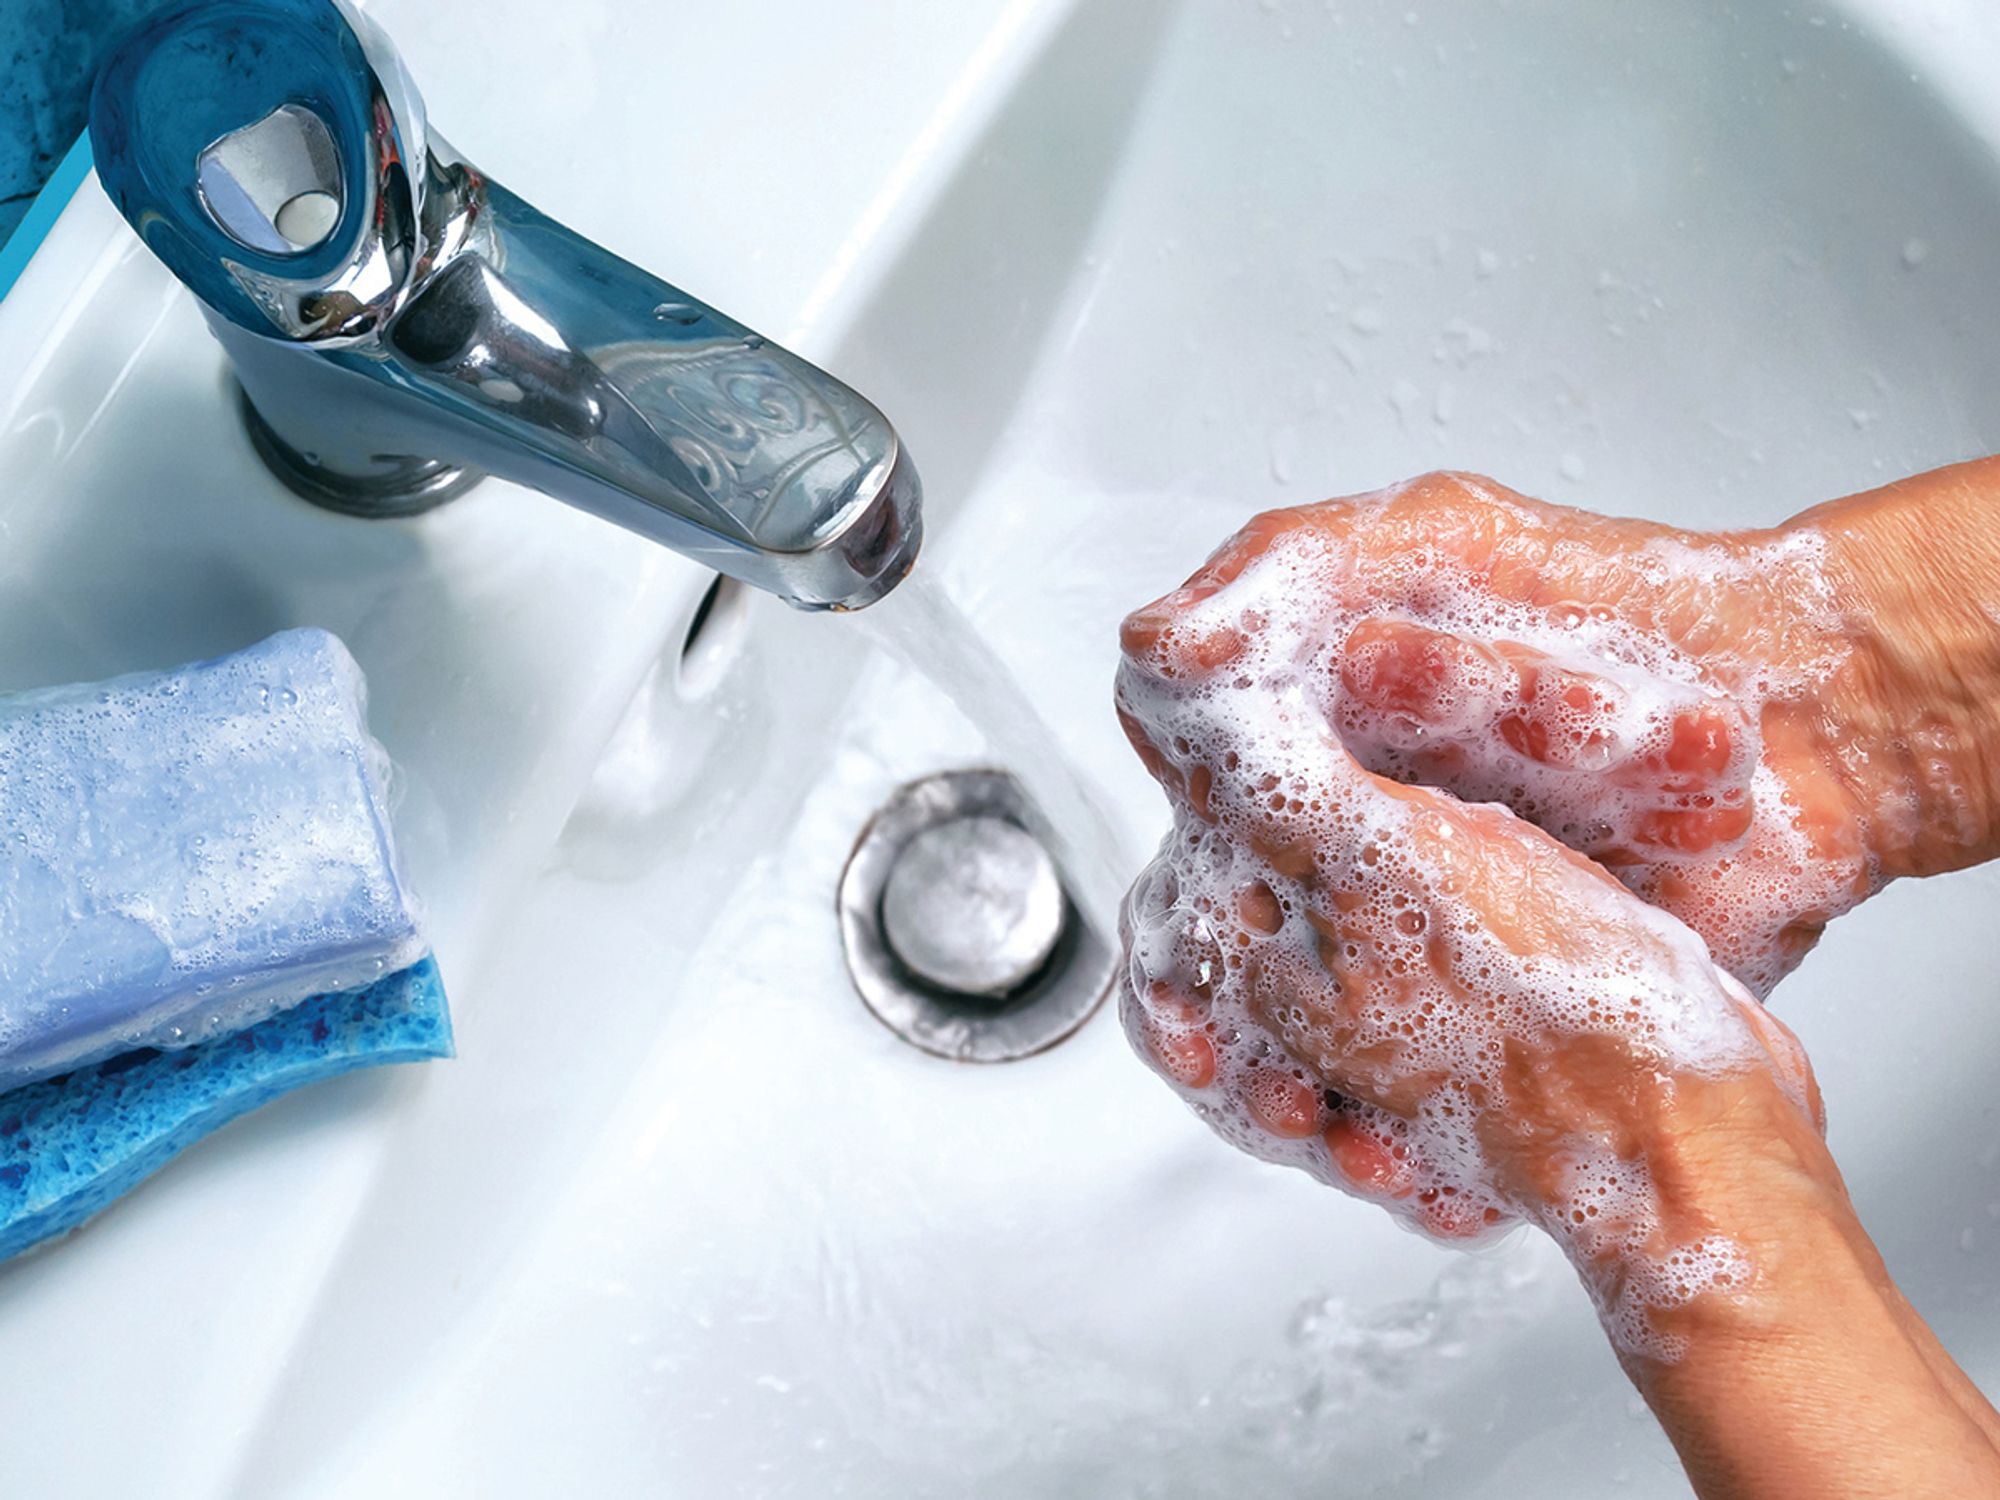 How do I address an employee’s personal hygiene issue?